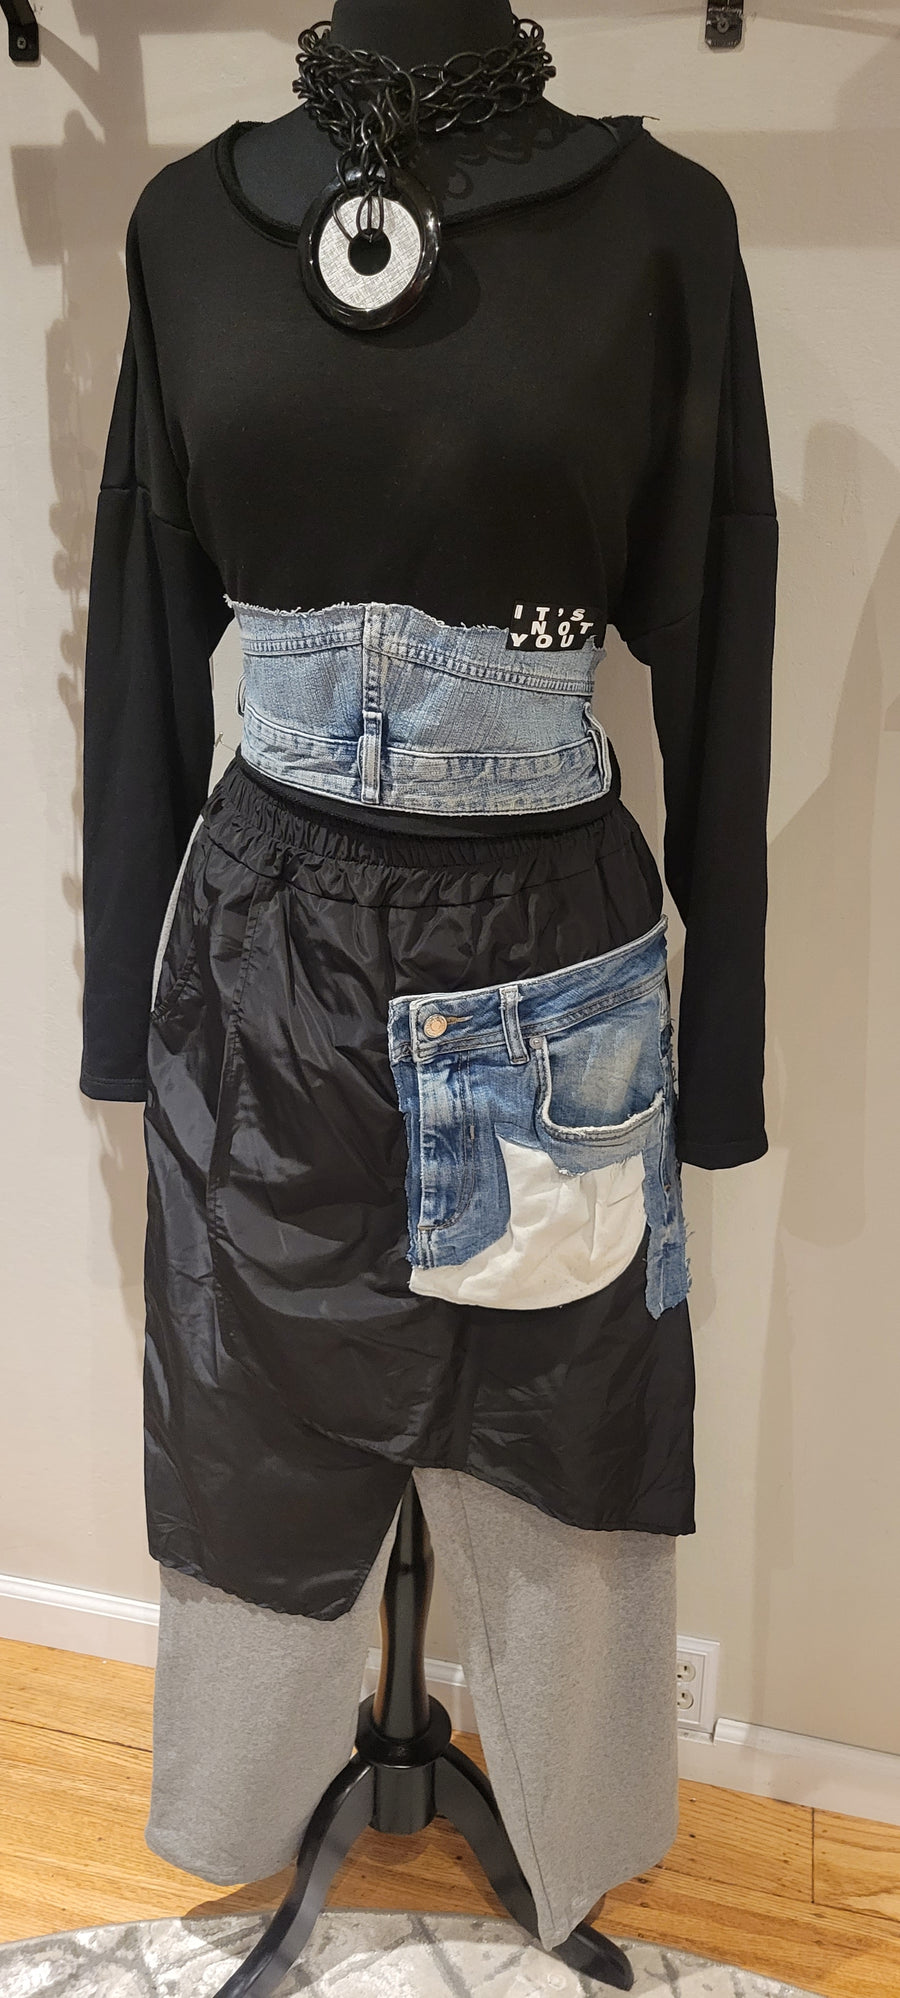 100% cotton sweatpants with a polyester wrap skirt overlay and exposed denim patch pocket